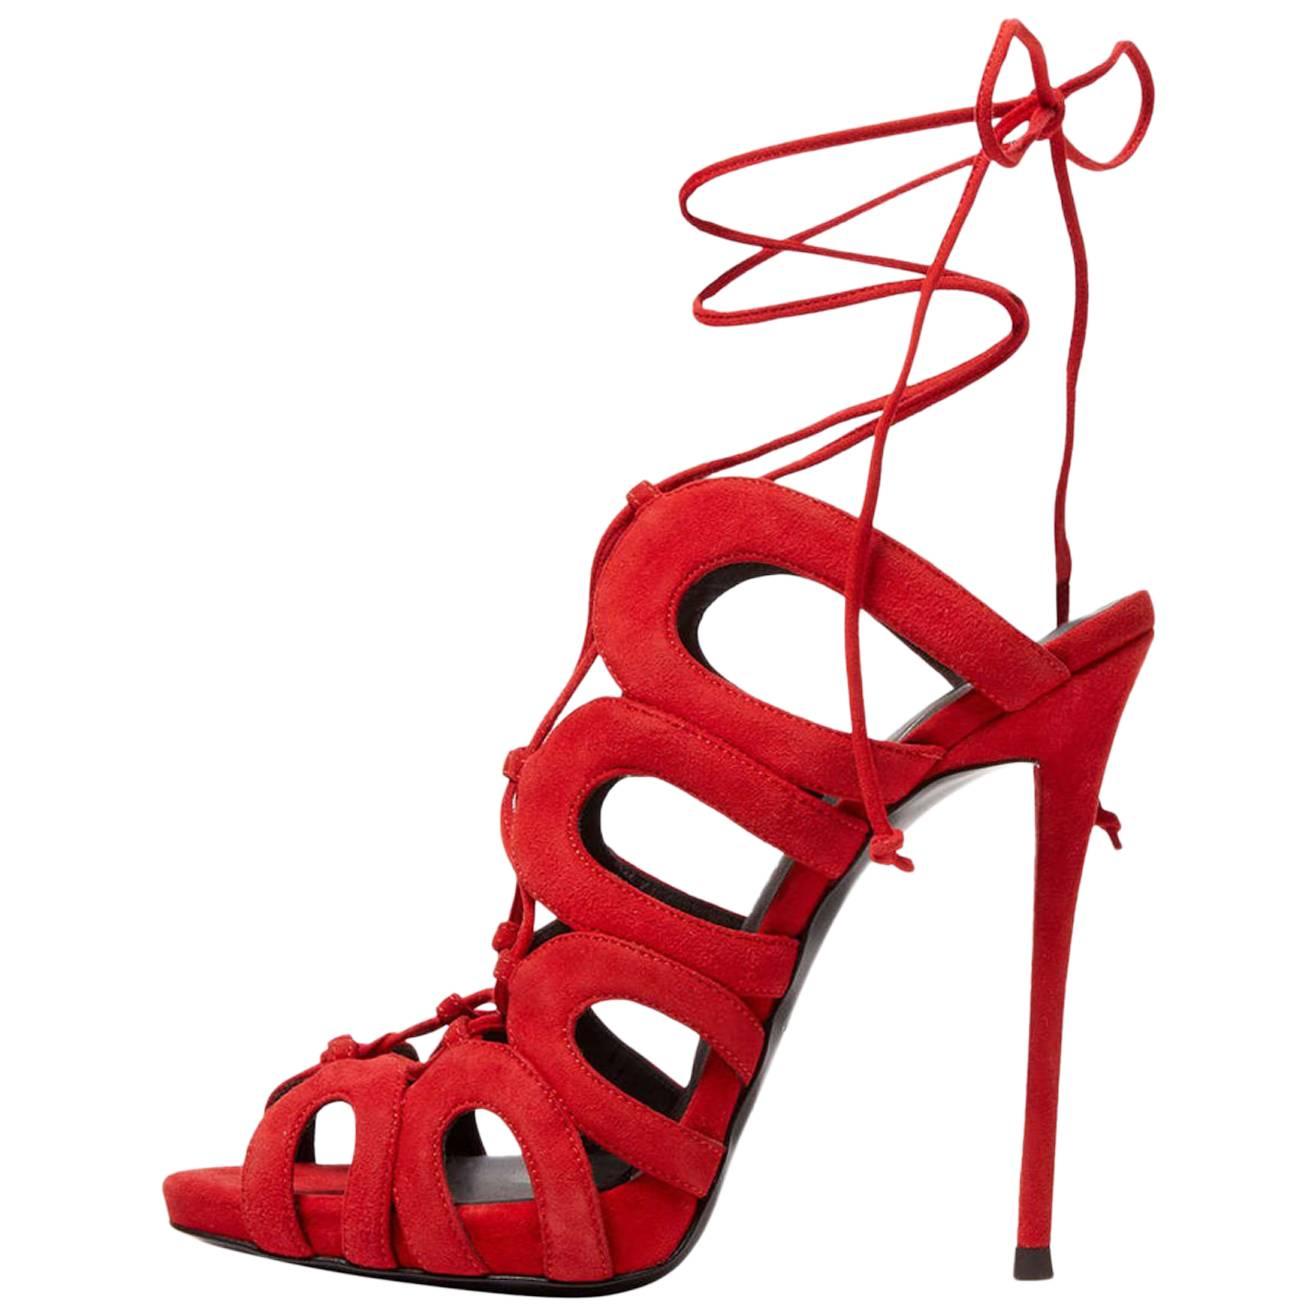 Giuseppe Zanotti New Red Suede Cut Out Ankle Tie Evening Sandals Heels in Boxp